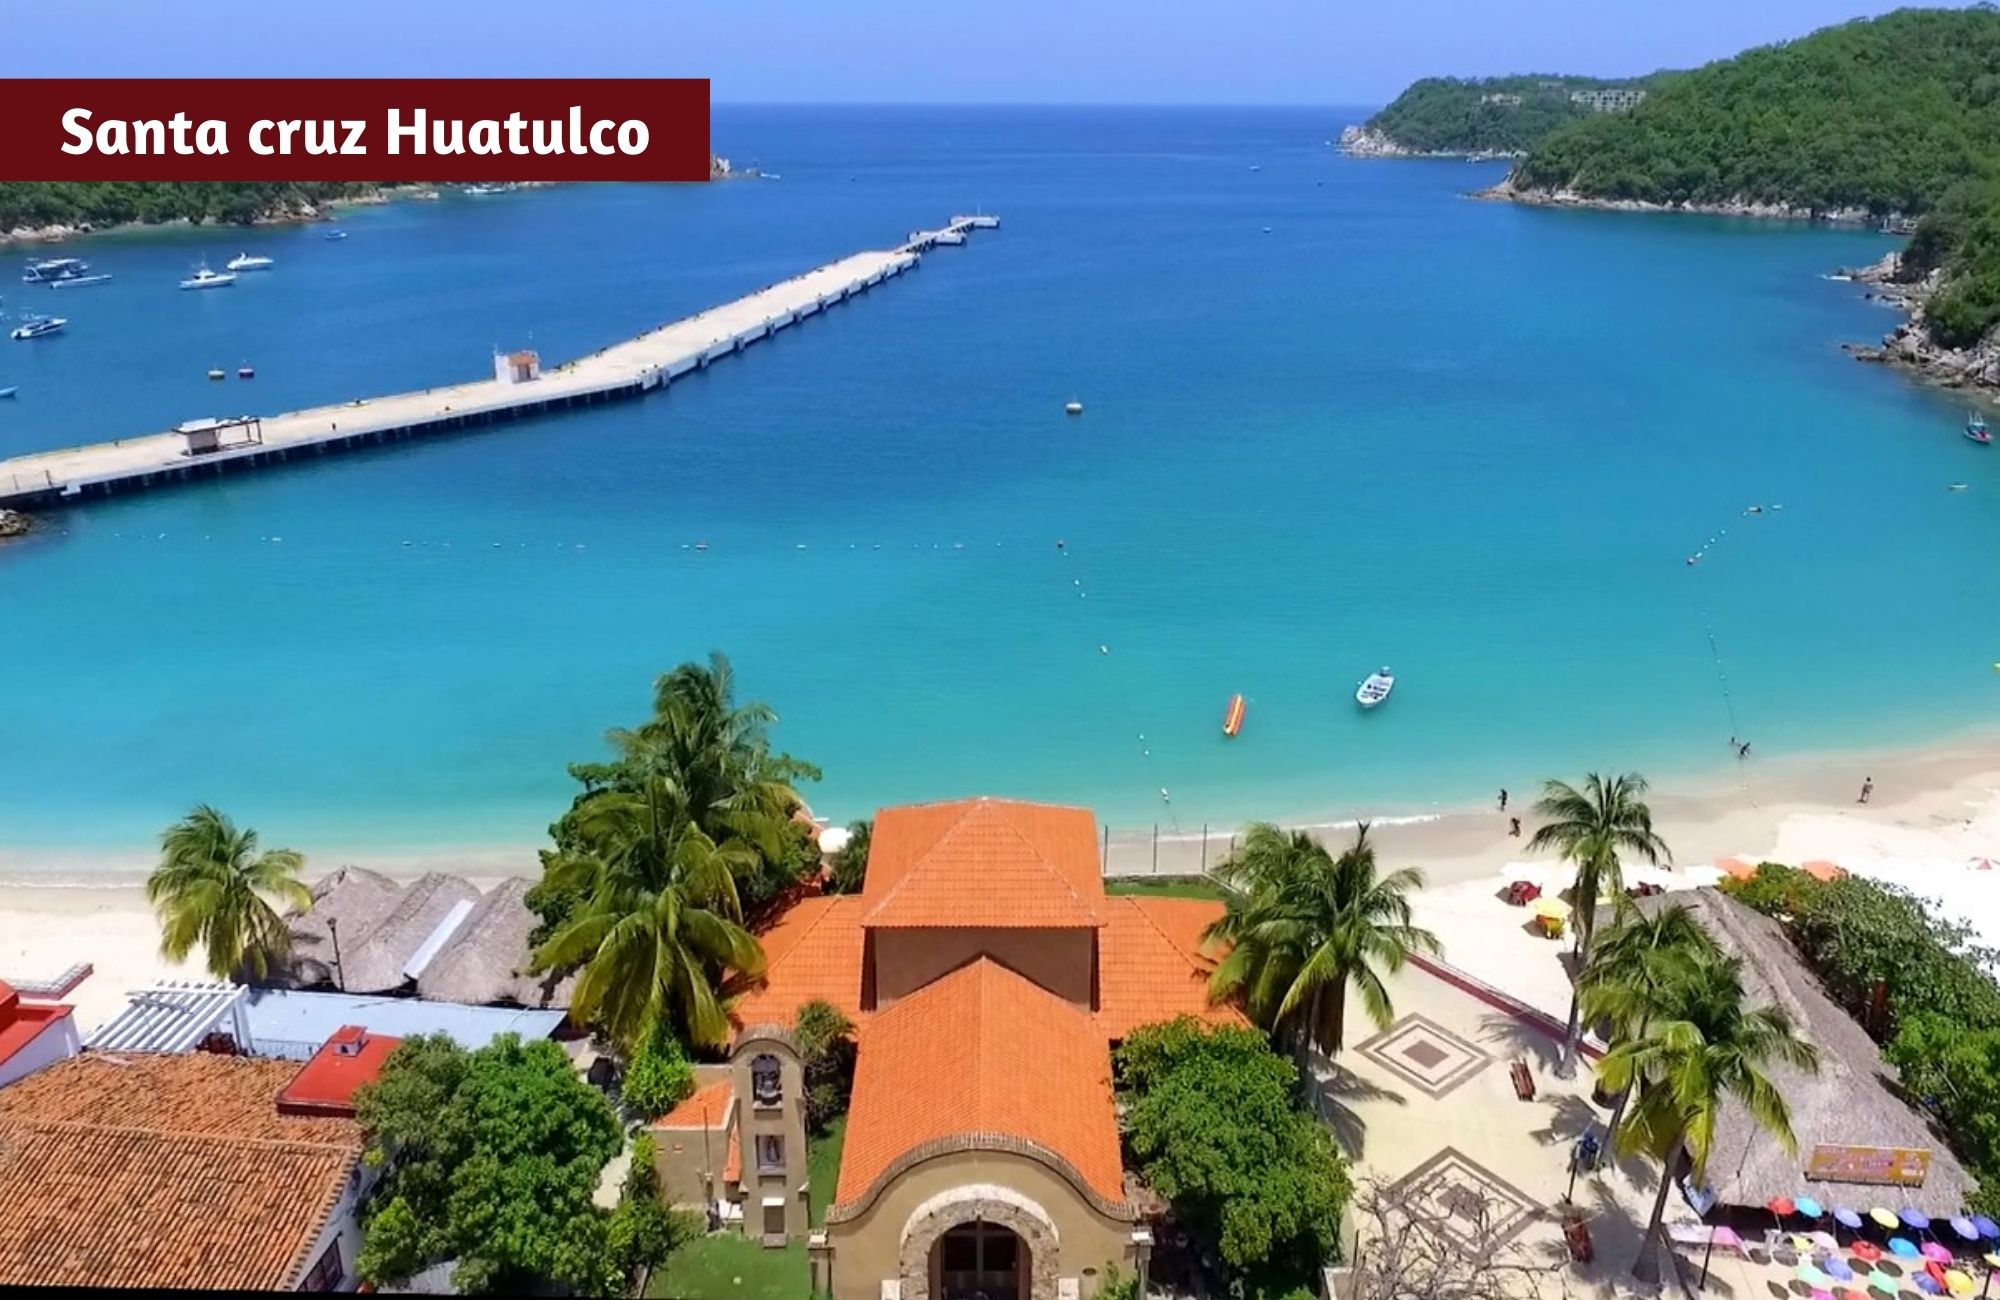 Condo with ocean view and private pool for sale in Huatulco.